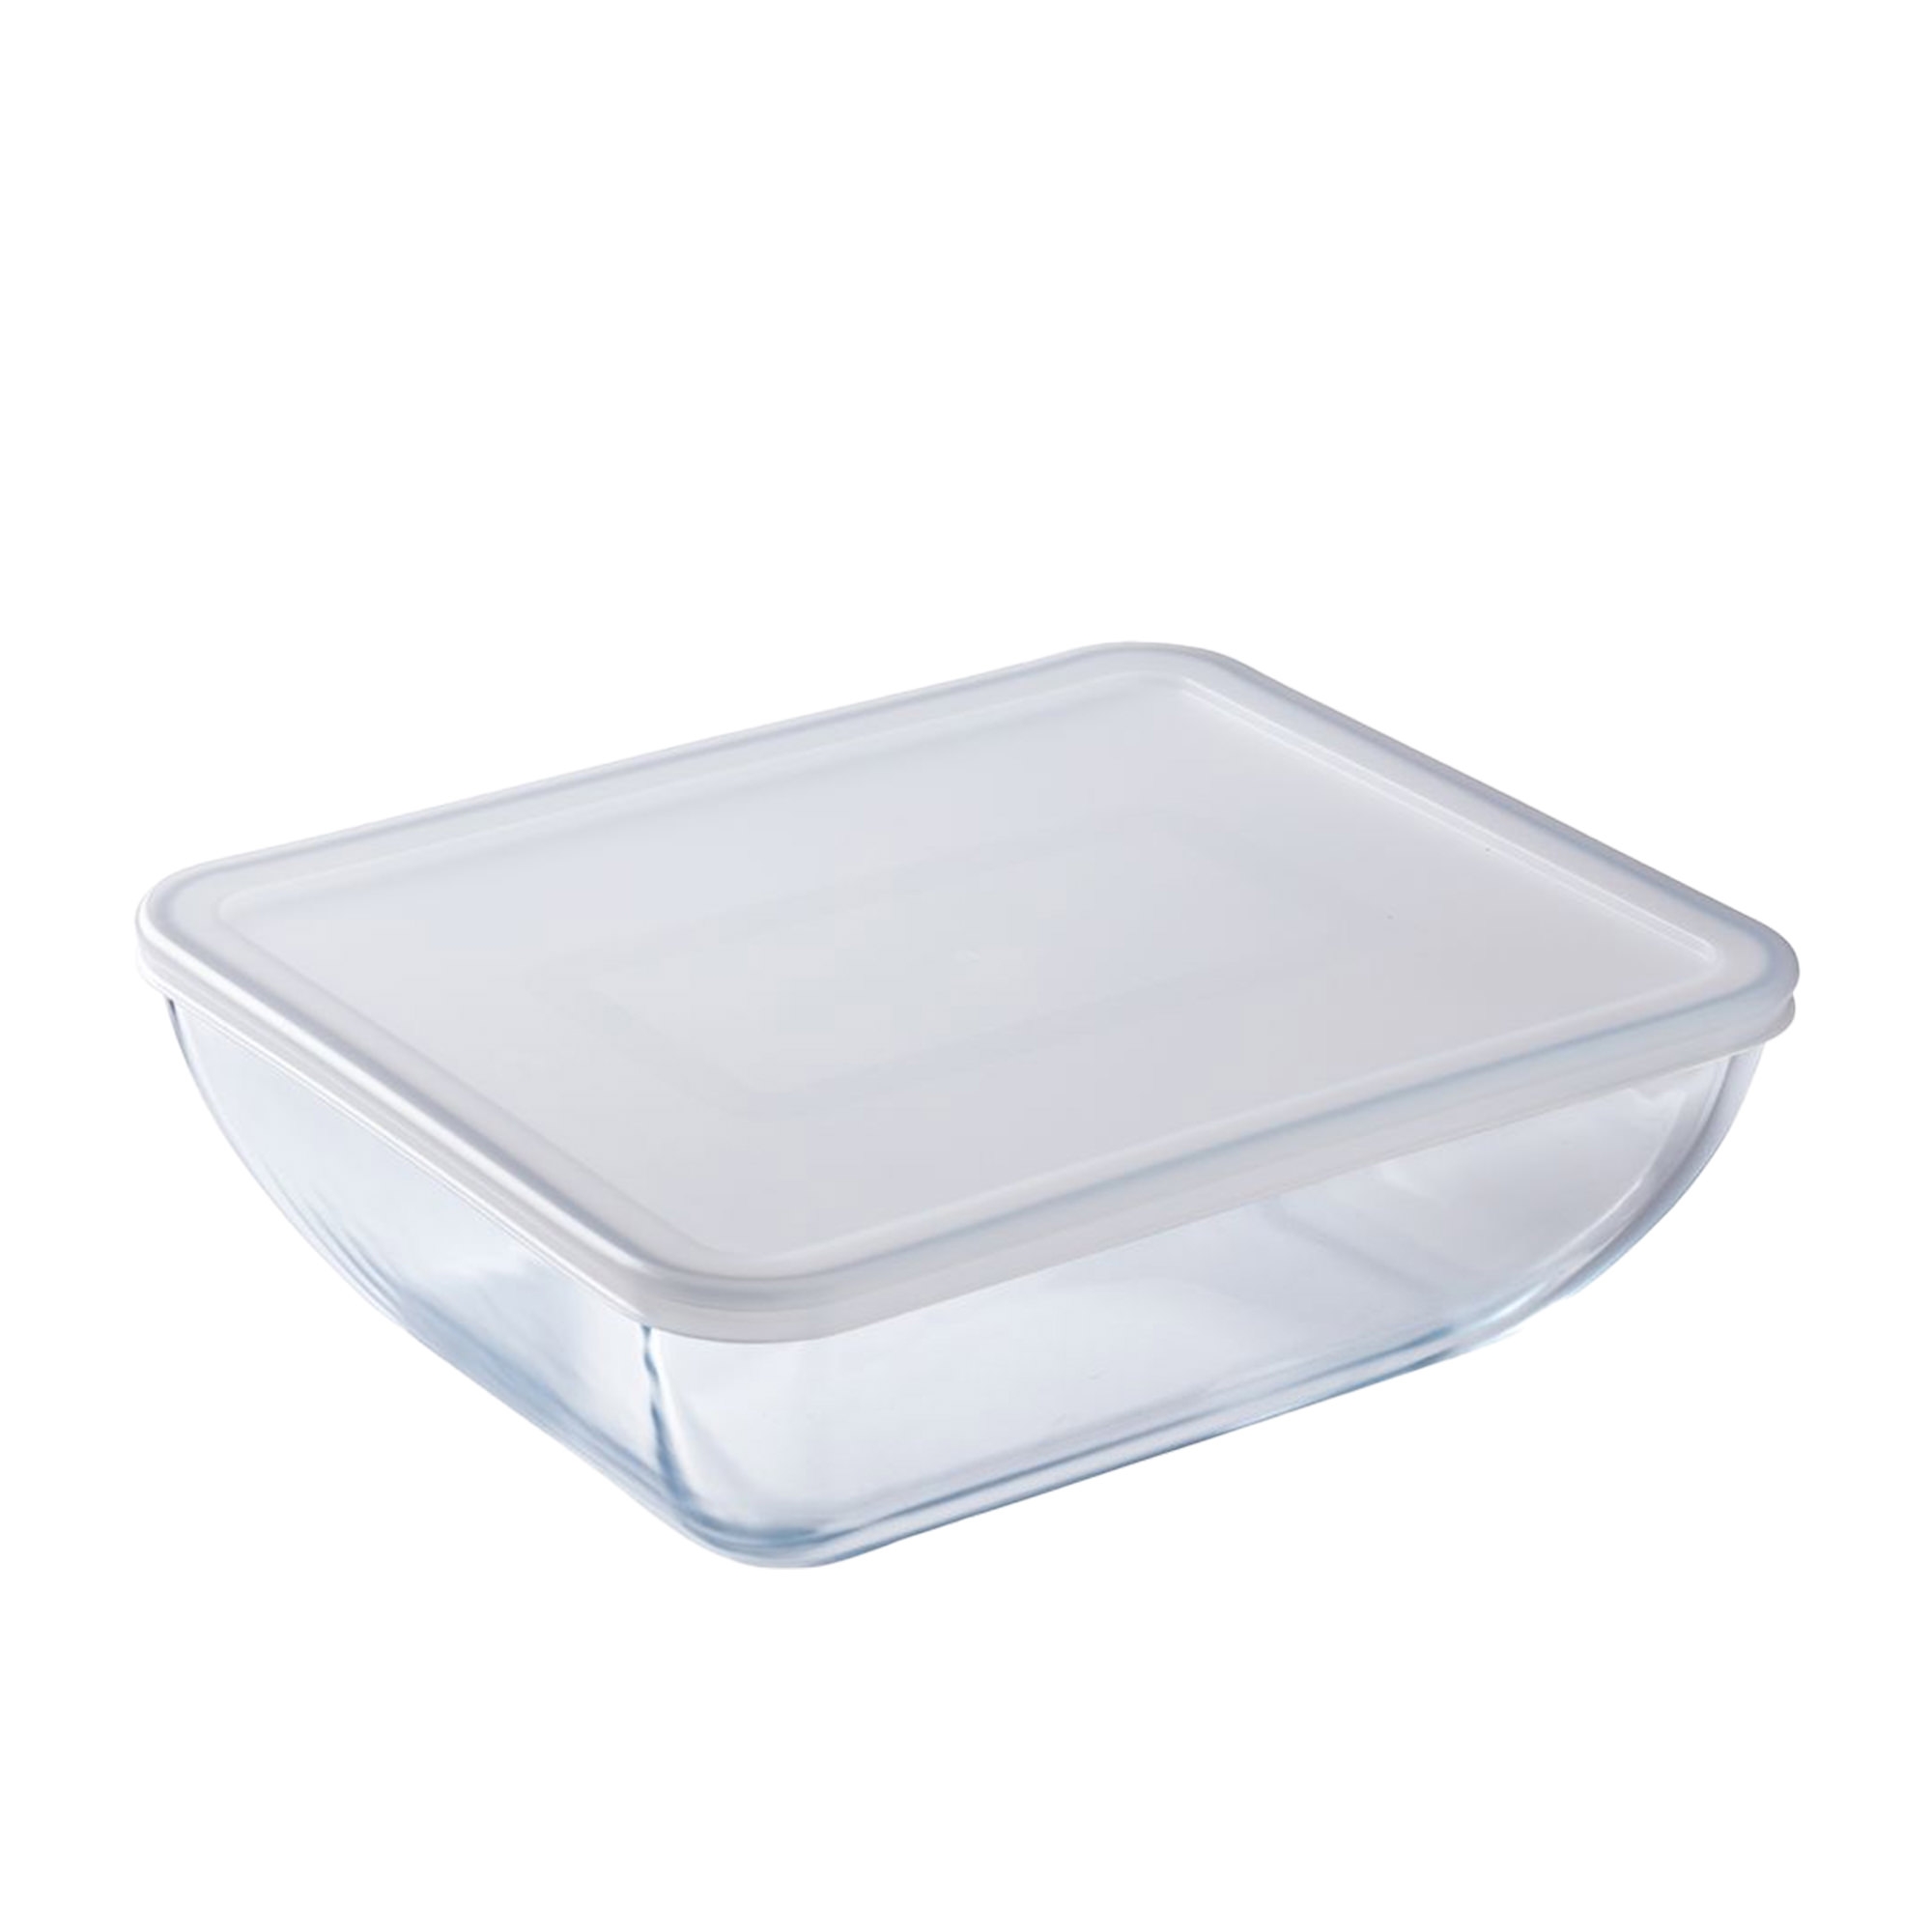 O' Cuisine Rectangular Glass Food Storage Container 3.5L Image 1